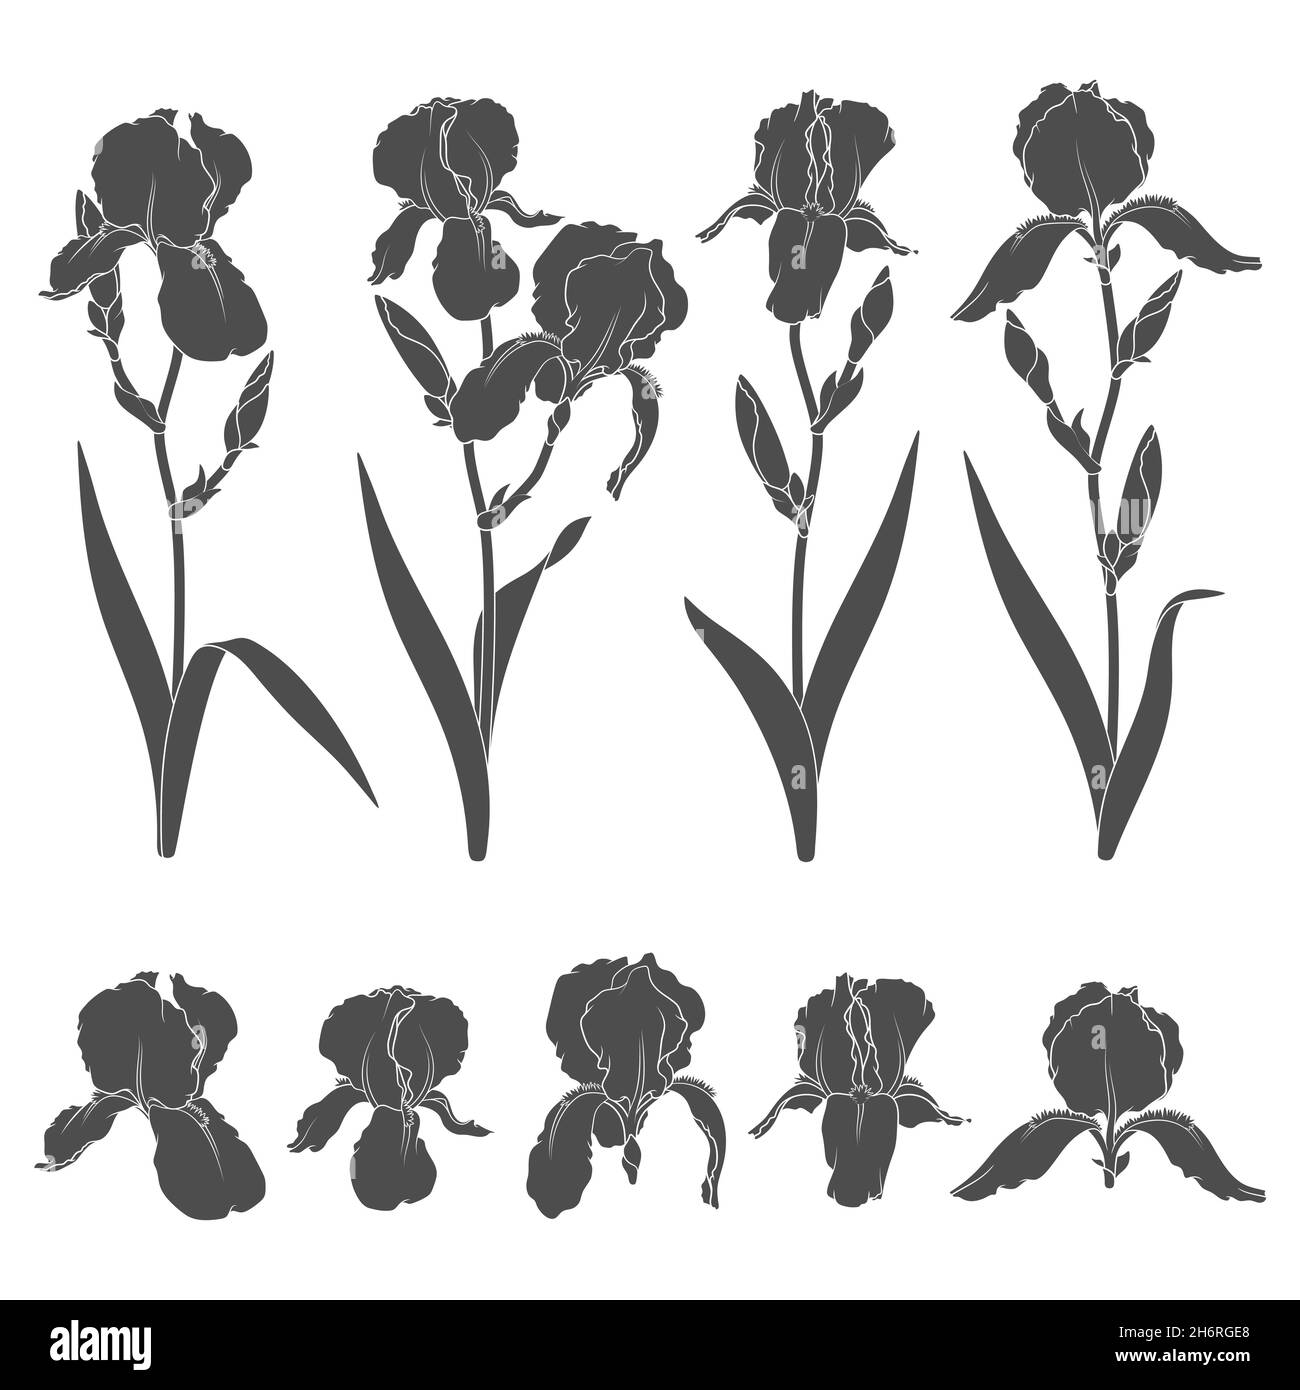 Set of black and white illustrations with iris flowers. Isolated vector objects on white background. Stock Vector